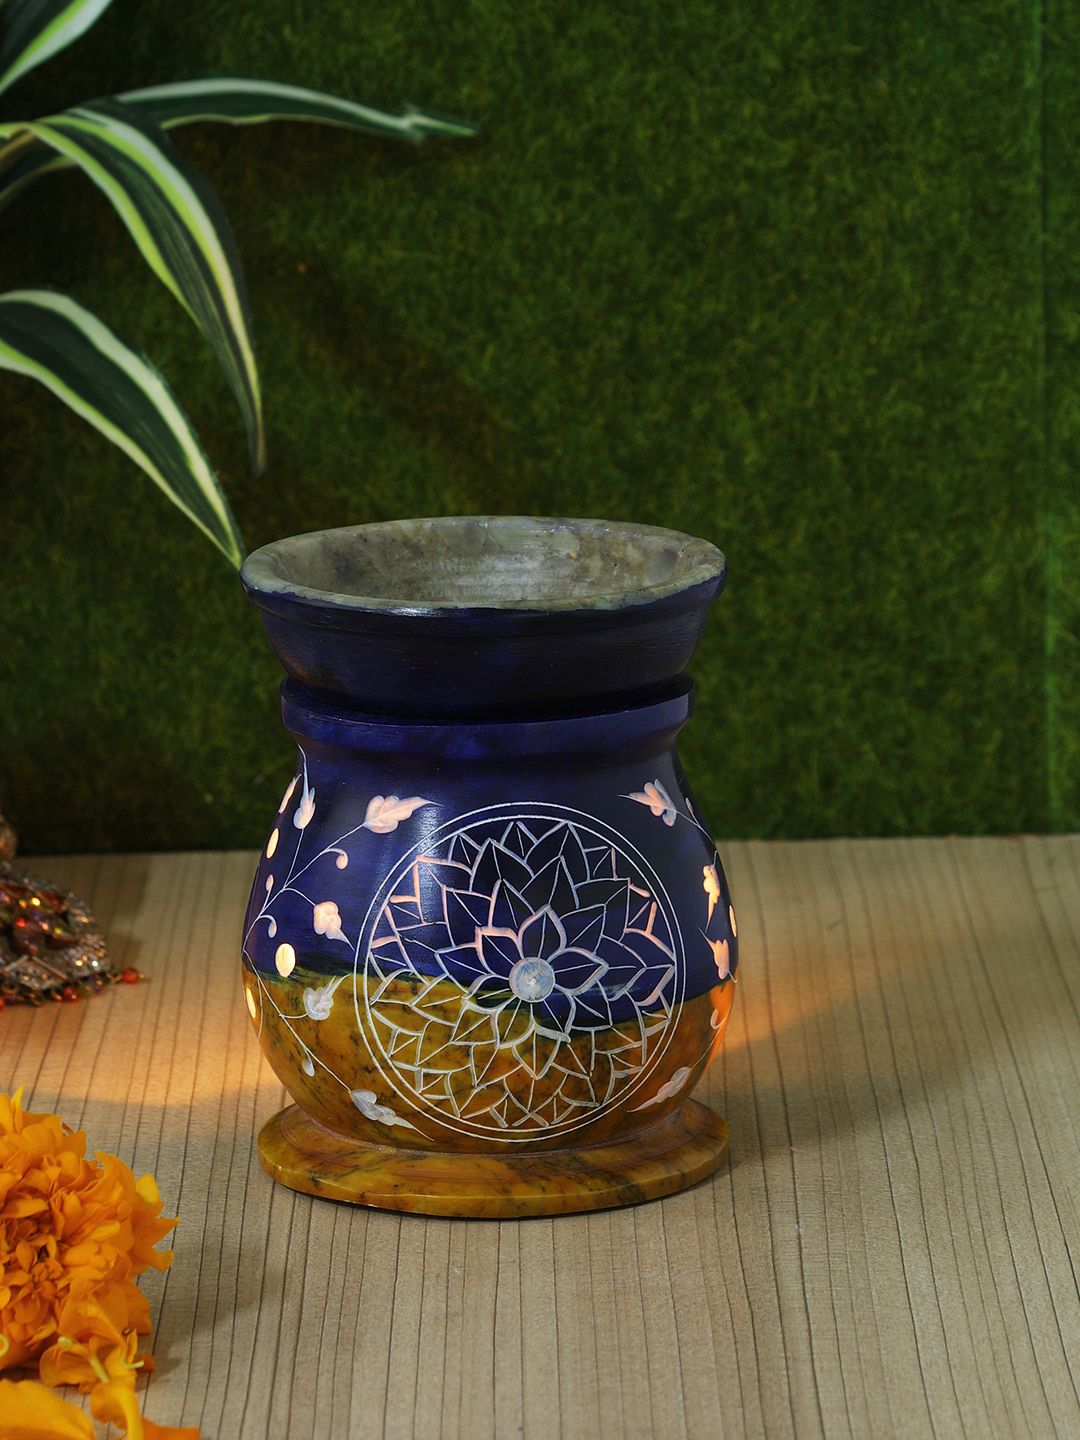 Aapno Rajasthan Blue Stone Oil Diffuser Price in India